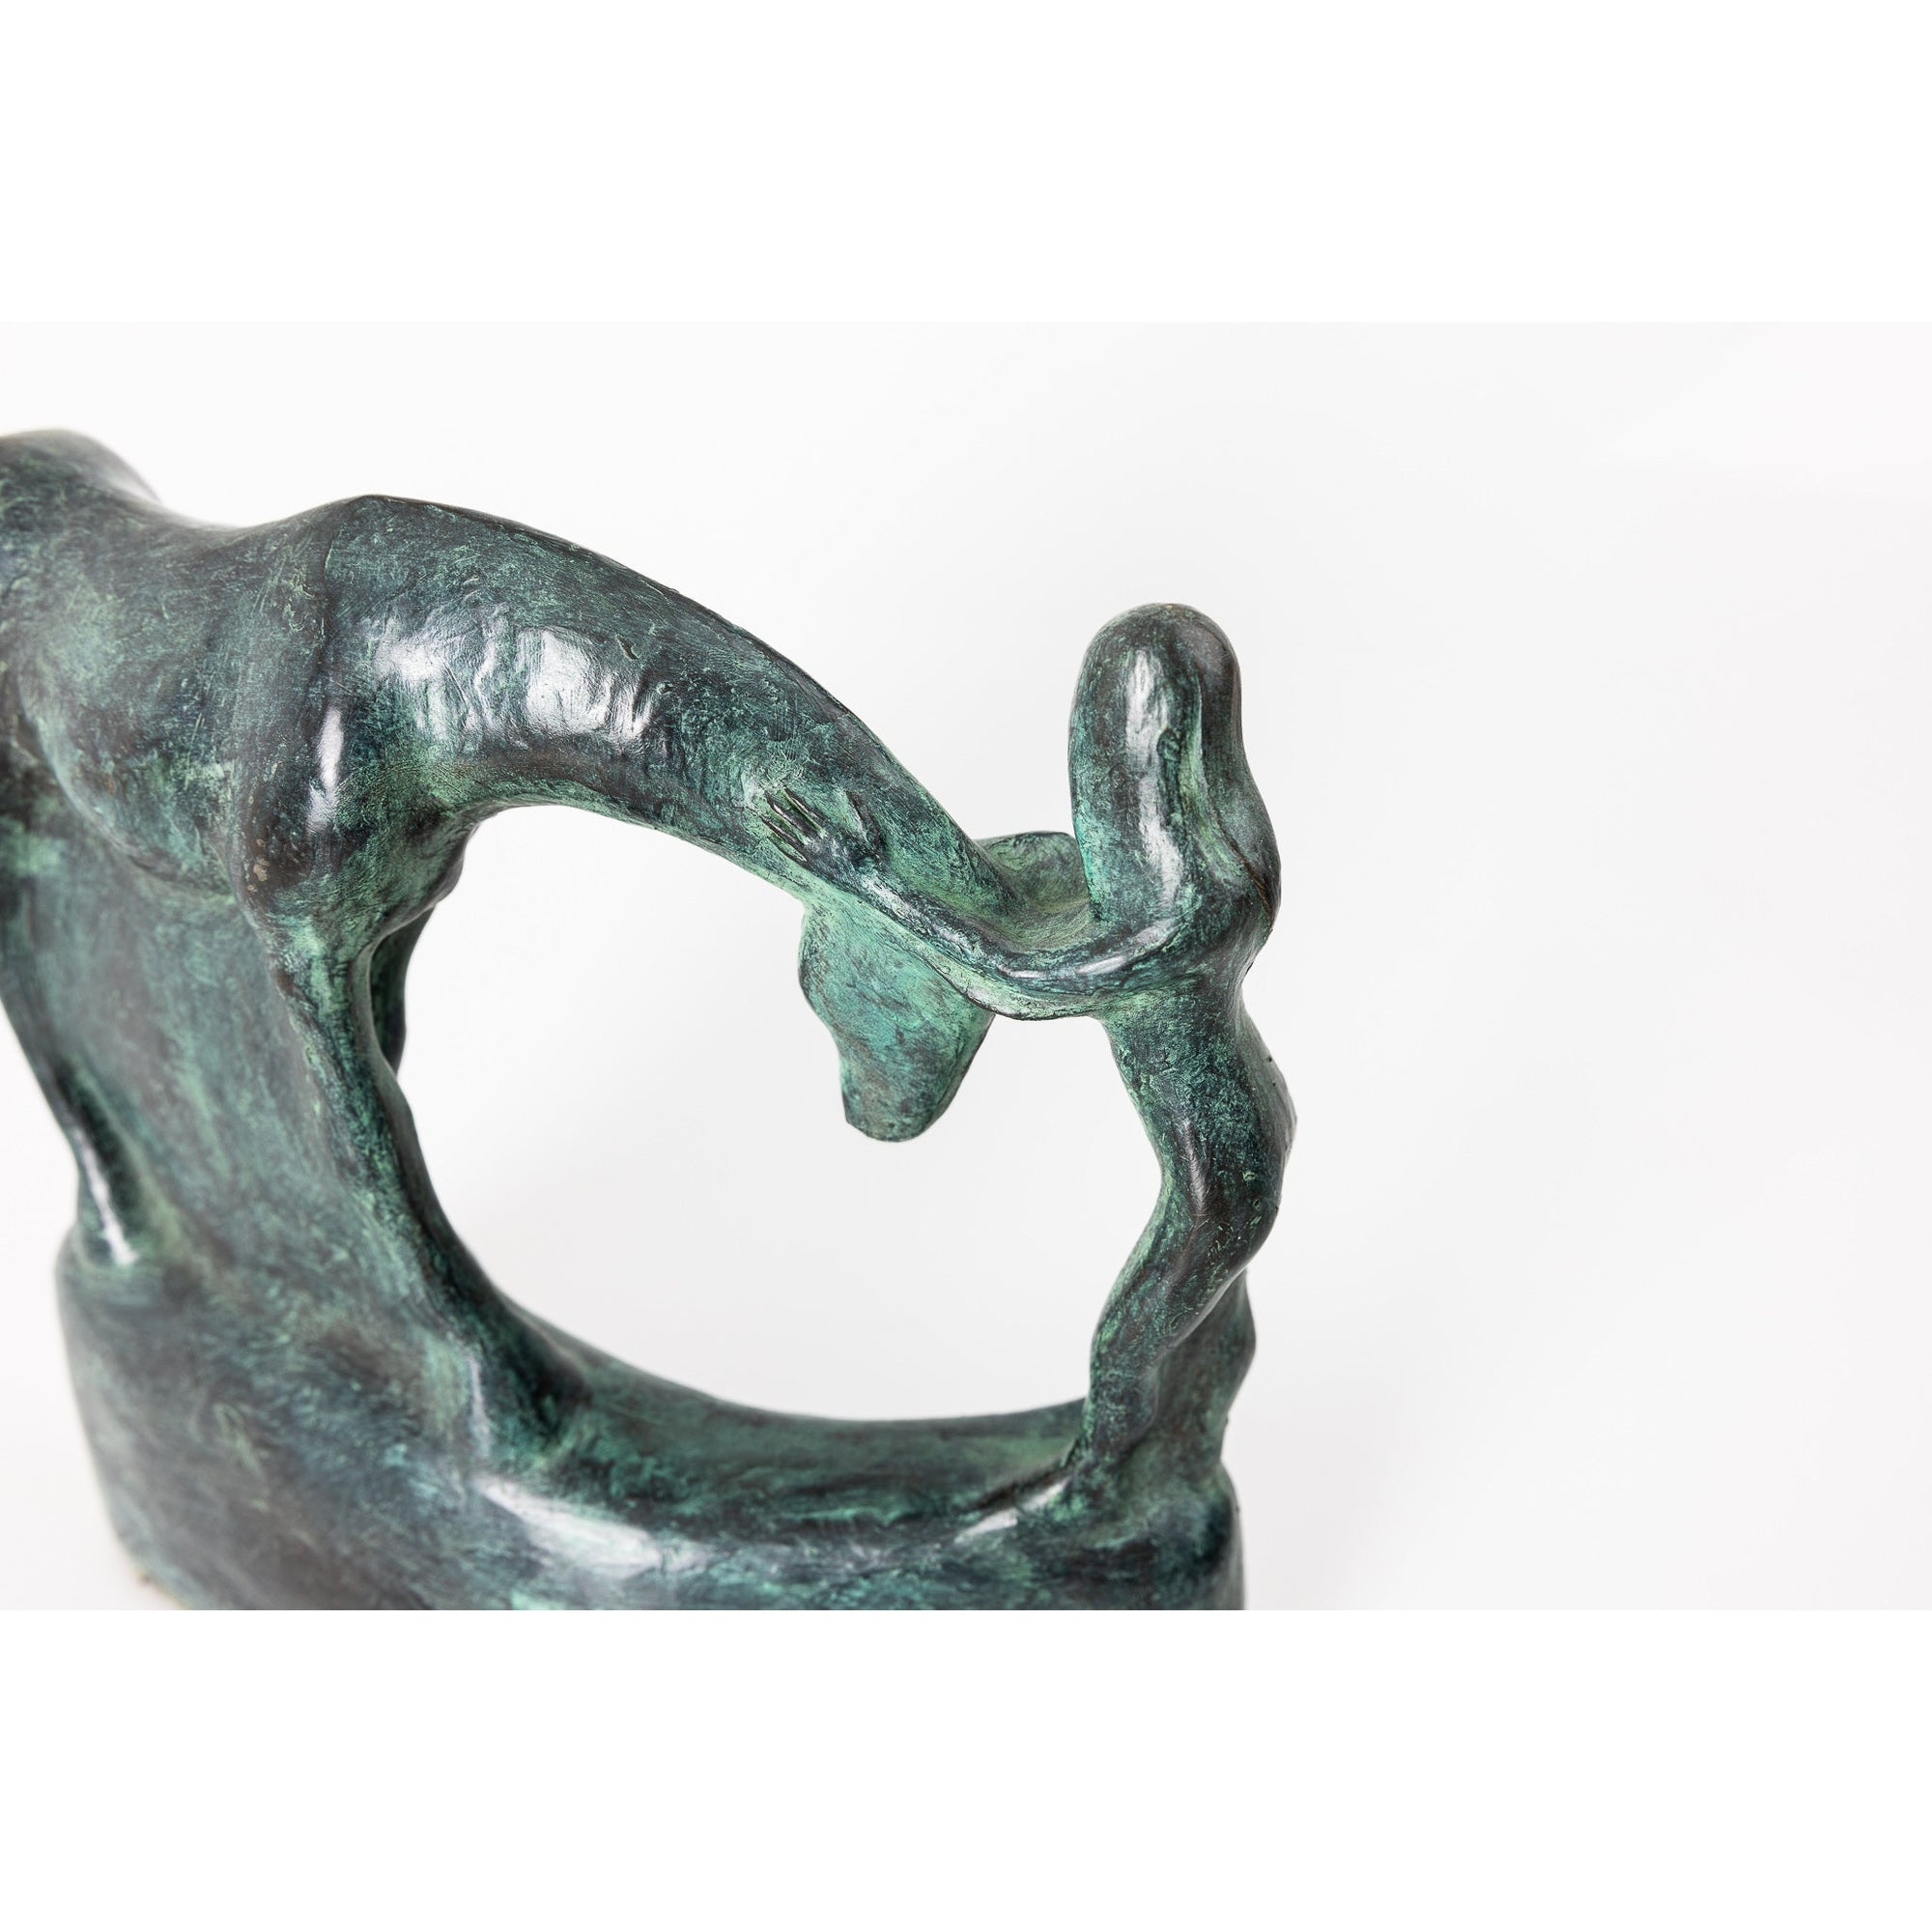 Greeting limited edition sculpture by Sophie Howard, available at Padstow Gallery, Cornwall